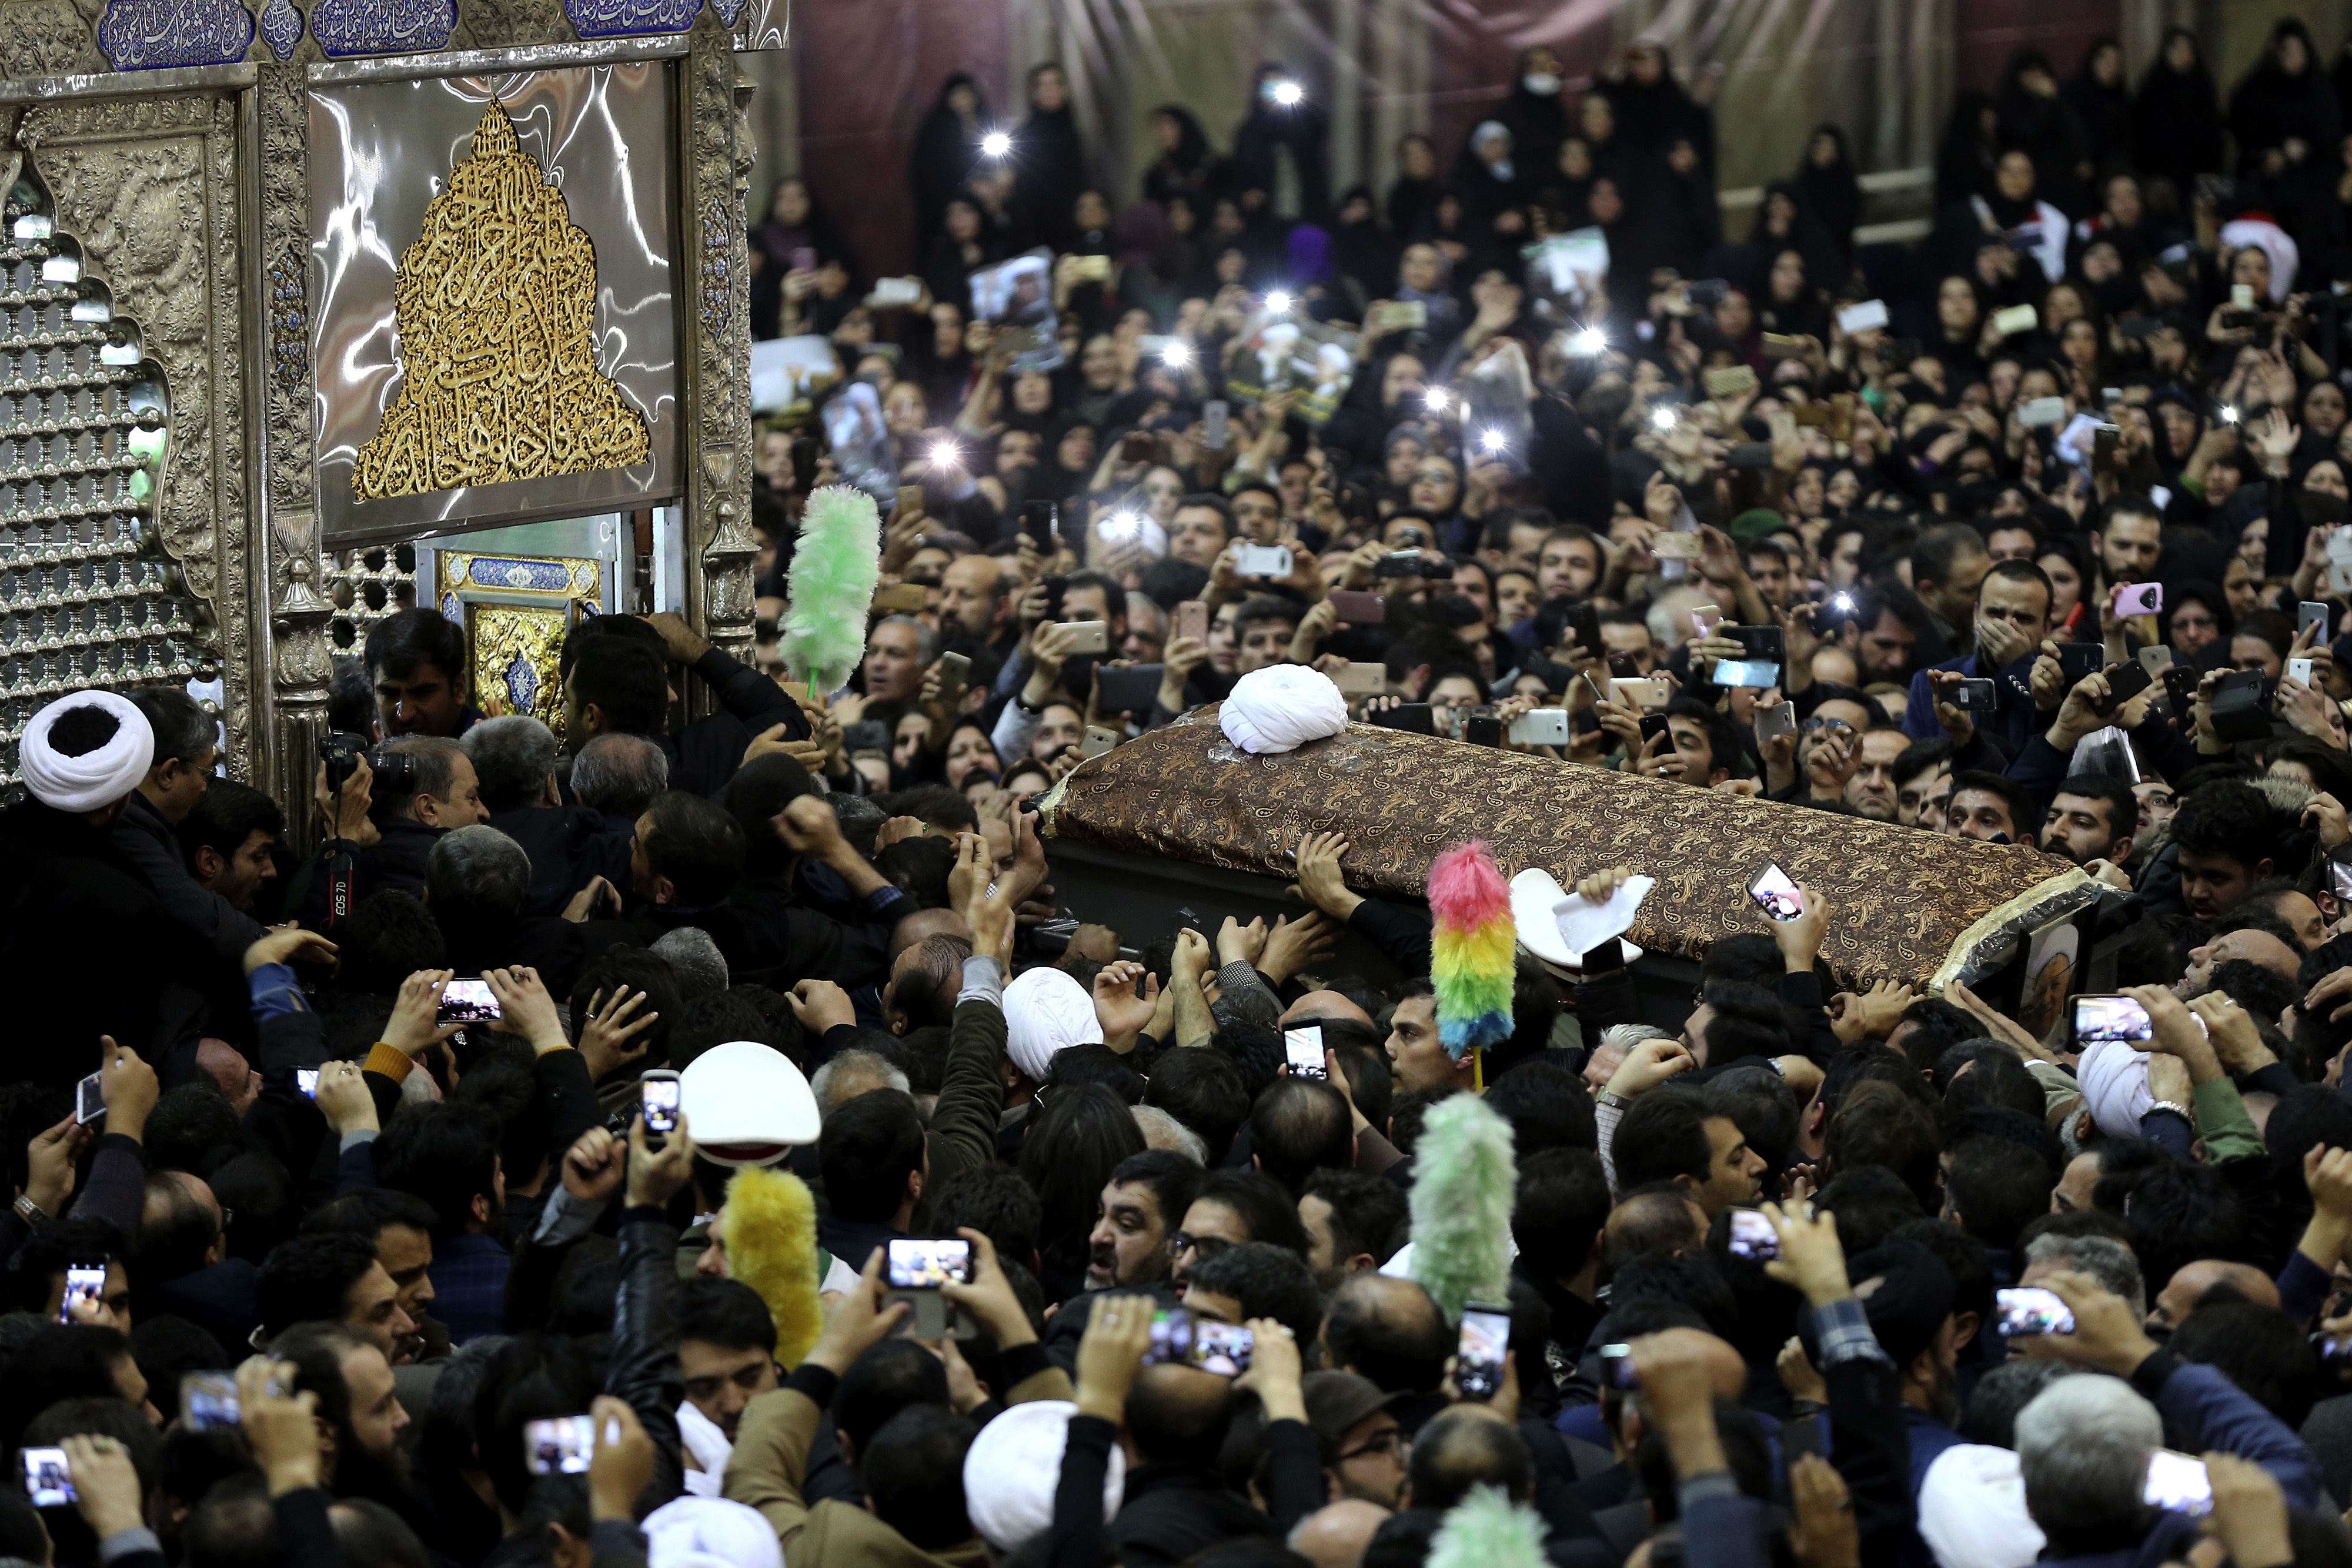 Mourners carry the coffin of former Iranian President Akbar Hashemi Rafsanjani during his burial at the shrine of the late revolutionary founder Ayatollah Khomeini just outside Tehran, Iran, Tuesday, Jan. 10, 2017. Hundreds of thousands mourned the late Iranian President Akbar Hashemi Rafsanjani on Tuesday, wailing in grief as his body was interred at a Tehran shrine alongside the leader of the country's 1979 Islamic Revolution. Rafsanjani's final resting place near the late Supreme Leader, Ayatollah Ruhollah Khomeini, reflected his legacy as one of the pillars of Iran's clerical-dominated political system, as he served in later years as a go-between for hard-liners and reformists. (AP Photo/Ebrahim Noroozi)